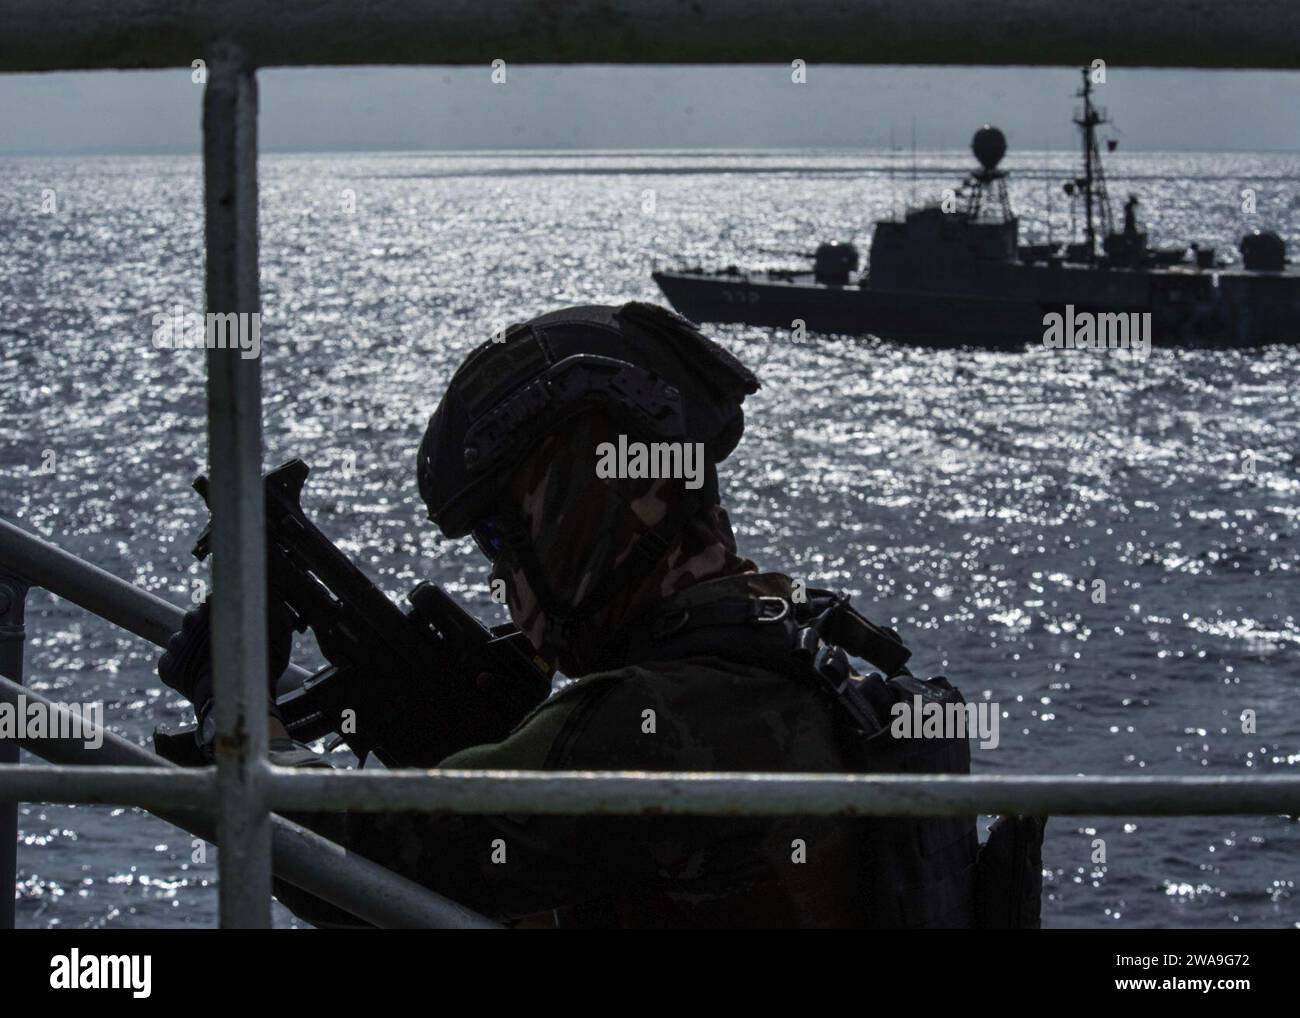 US military forces. 180903FV739-043 AT SEA (September 3, 2018) -  A Royal Thai Navy Sailor embarks a vessel during Visit, Board, Search, and Seizure practical scenario training as part of Southeast Asia Cooperation and Training (SEACAT) 2018. This is the 17th annual SEACAT exercise and includes participants from the U.S., Brunei, Bangladesh, Thailand, Philippines, Singapore, Vietnam, Malaysia and Indonesia. (U.S. Navy photo by Mass Communication Specialist 3rd Class Christopher A. Veloicaza) Stock Photo